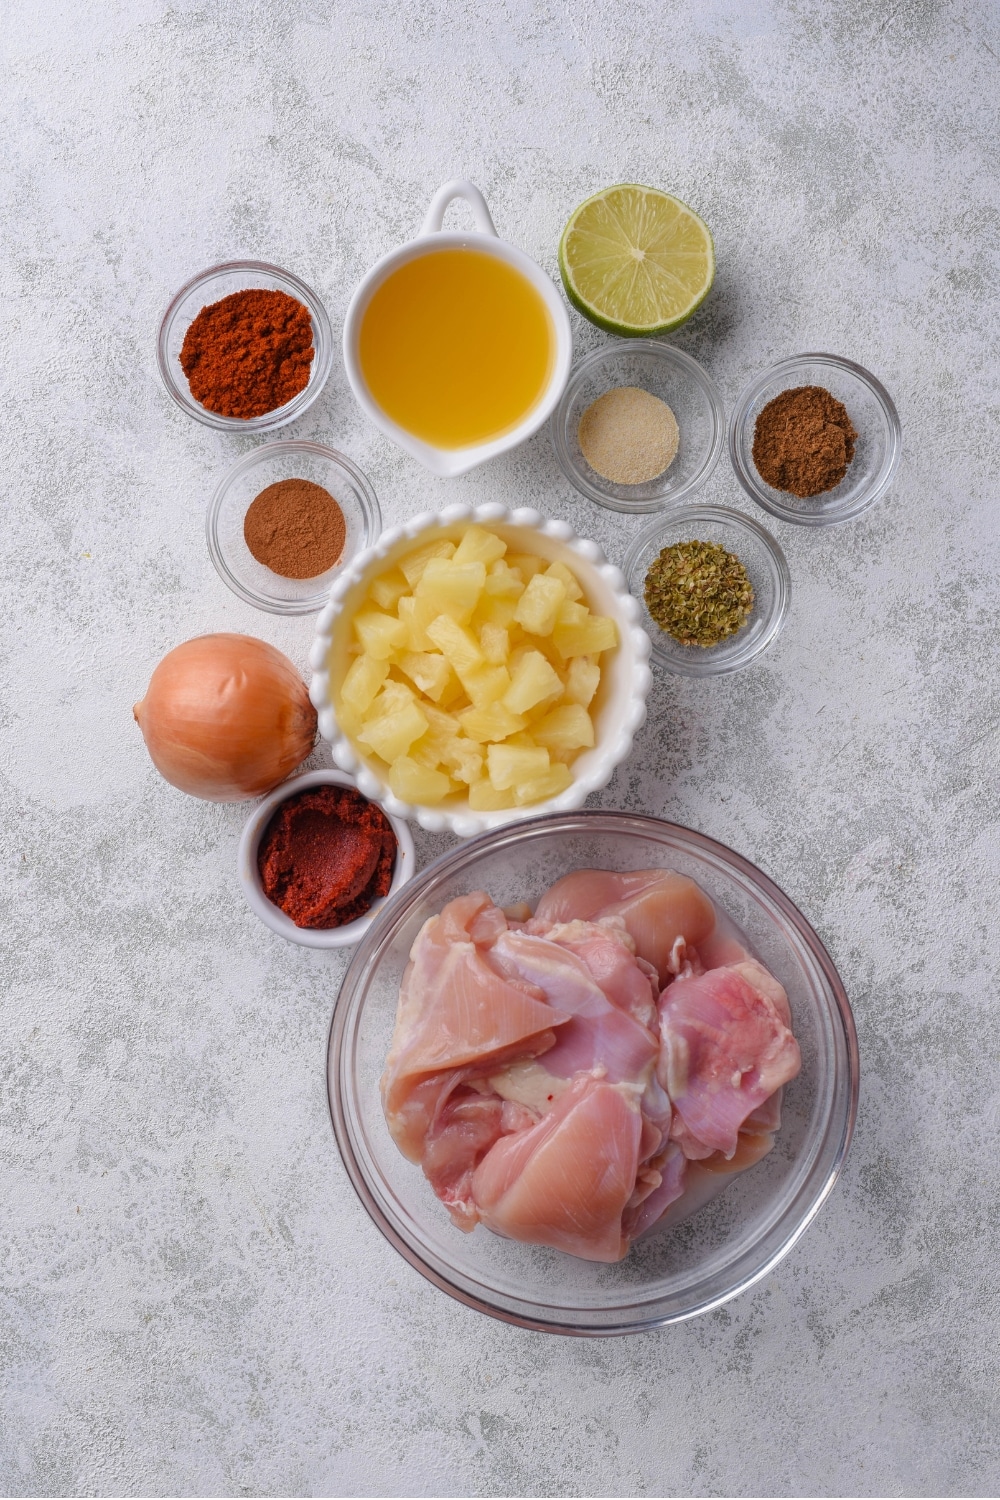 An overhead shot of several bowls in various sizes filled with ingredients for chicken al pastor including raw chicken thighs, pineapple chunks, pineapple juice, chili powder, and oregano. There is also an onion and halved lime.